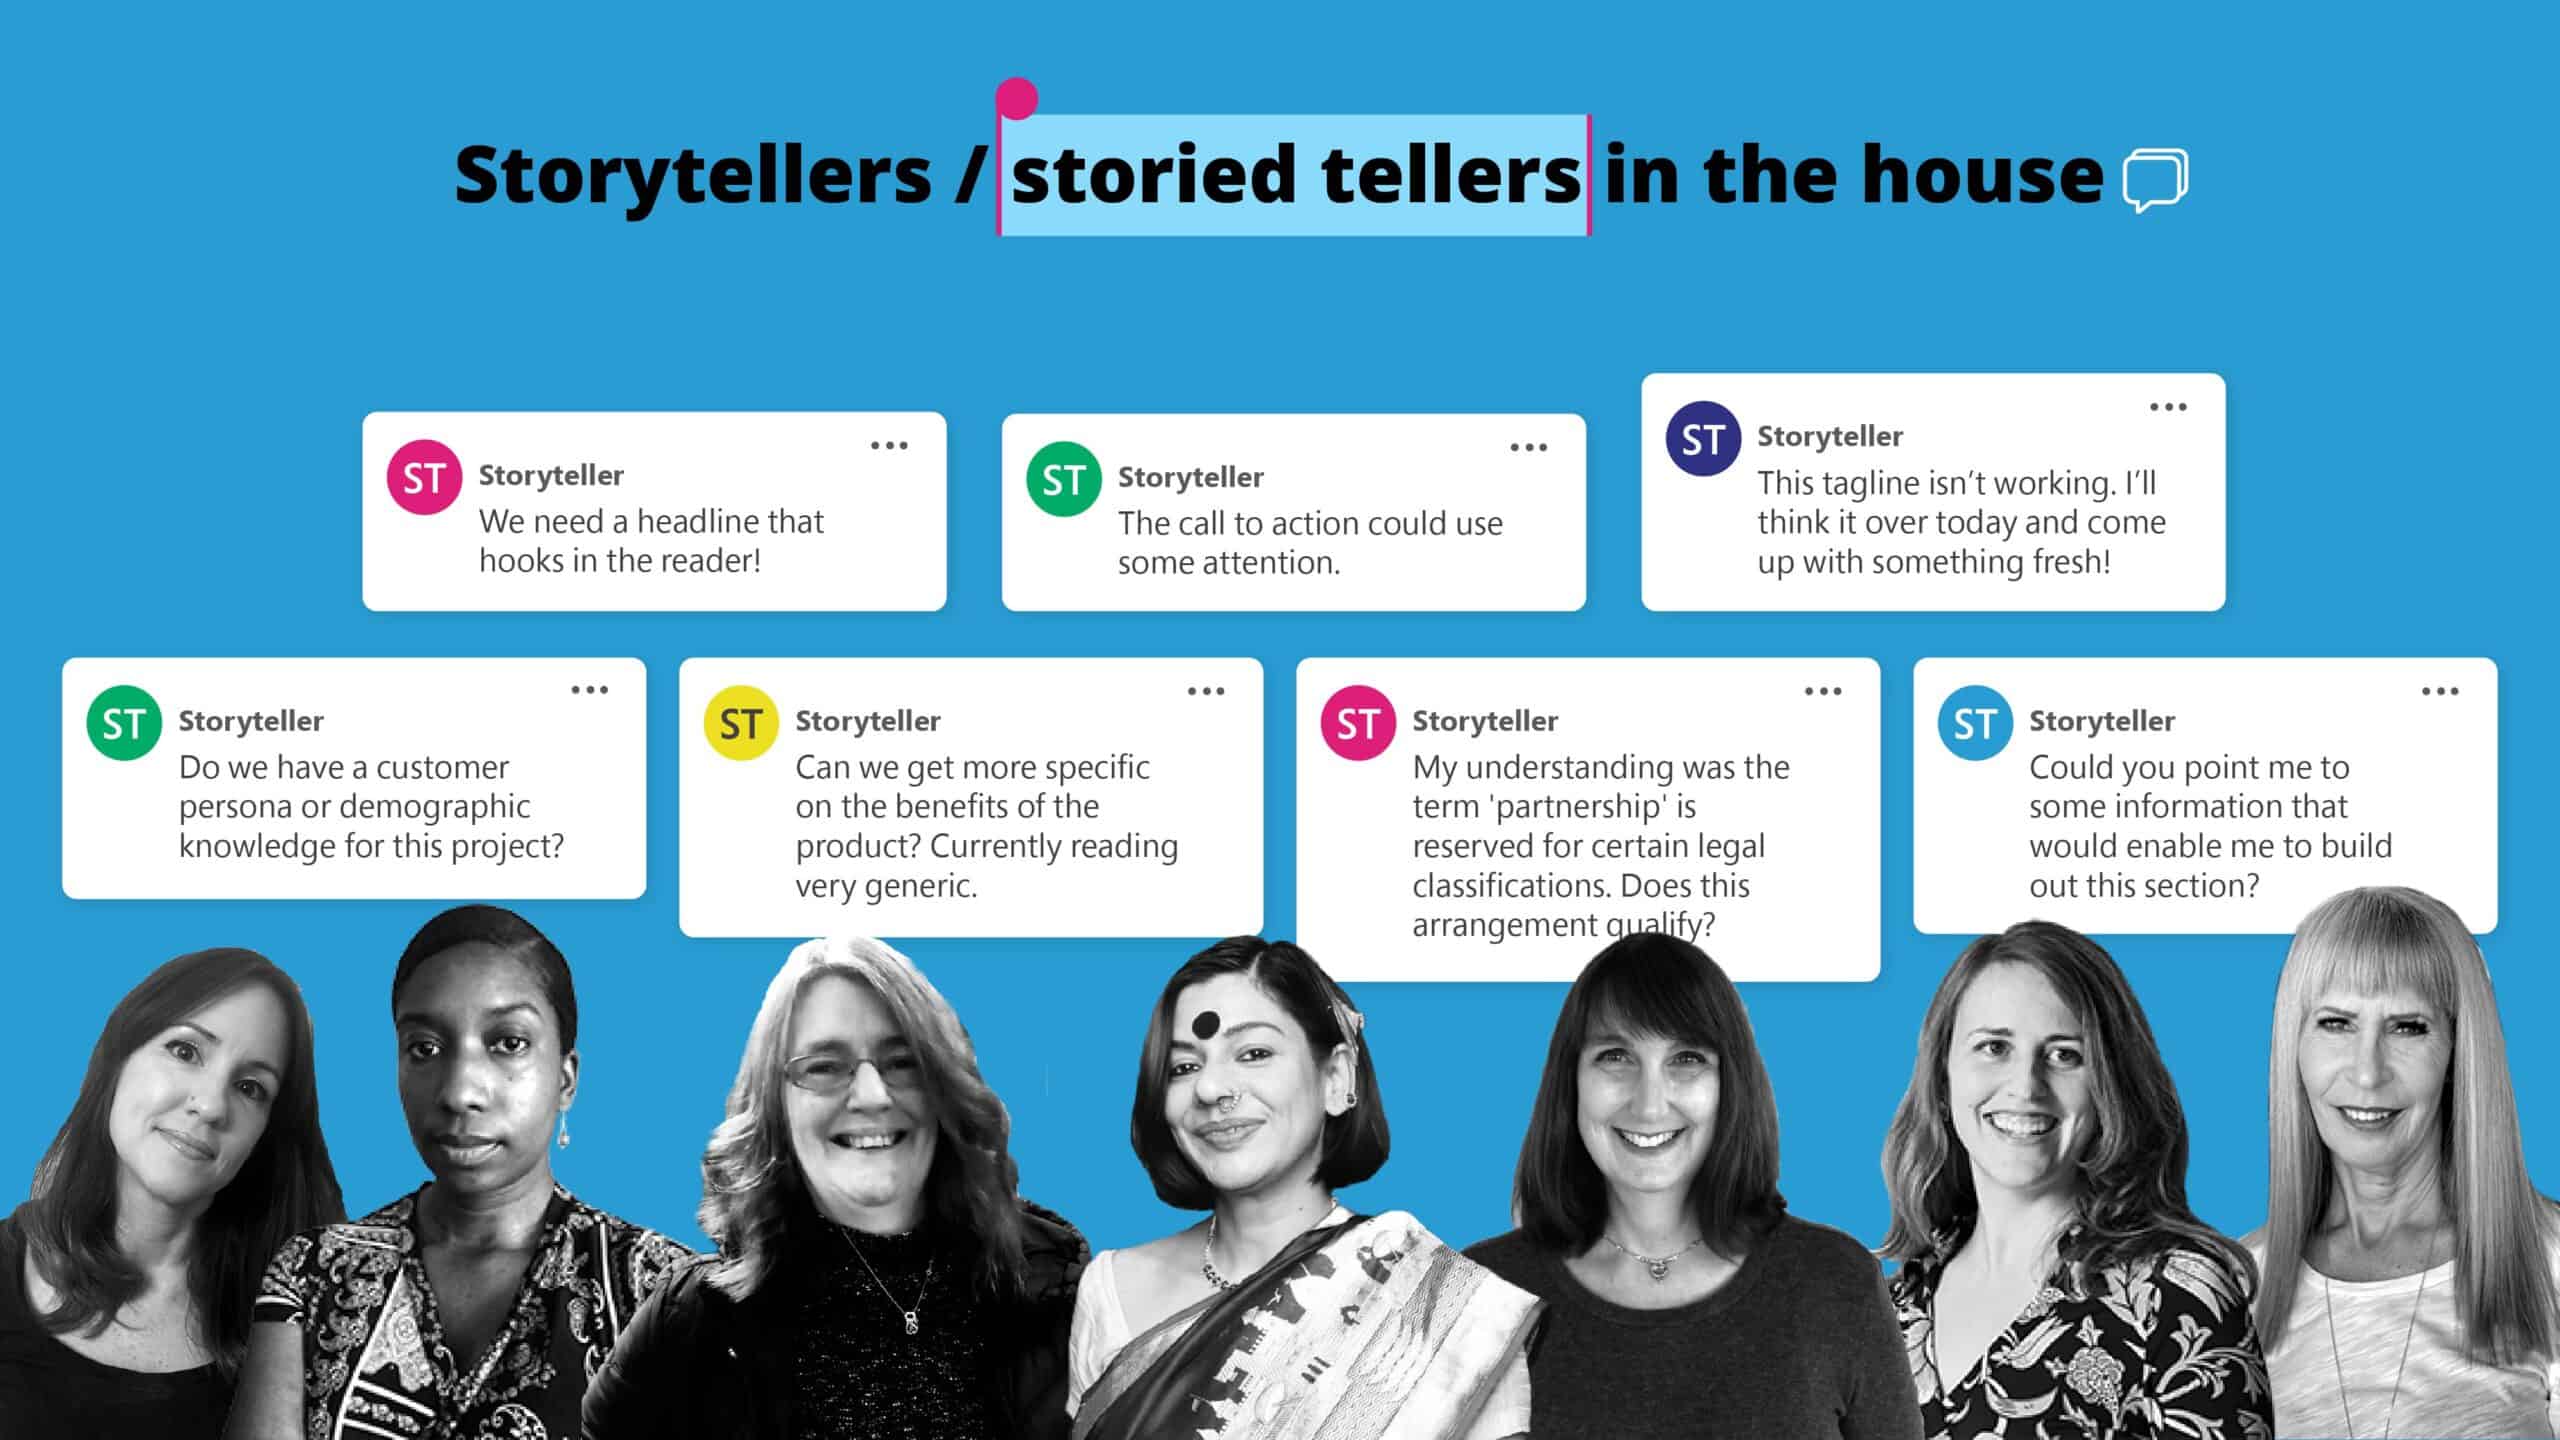 Storytellers / storied tellers in the house